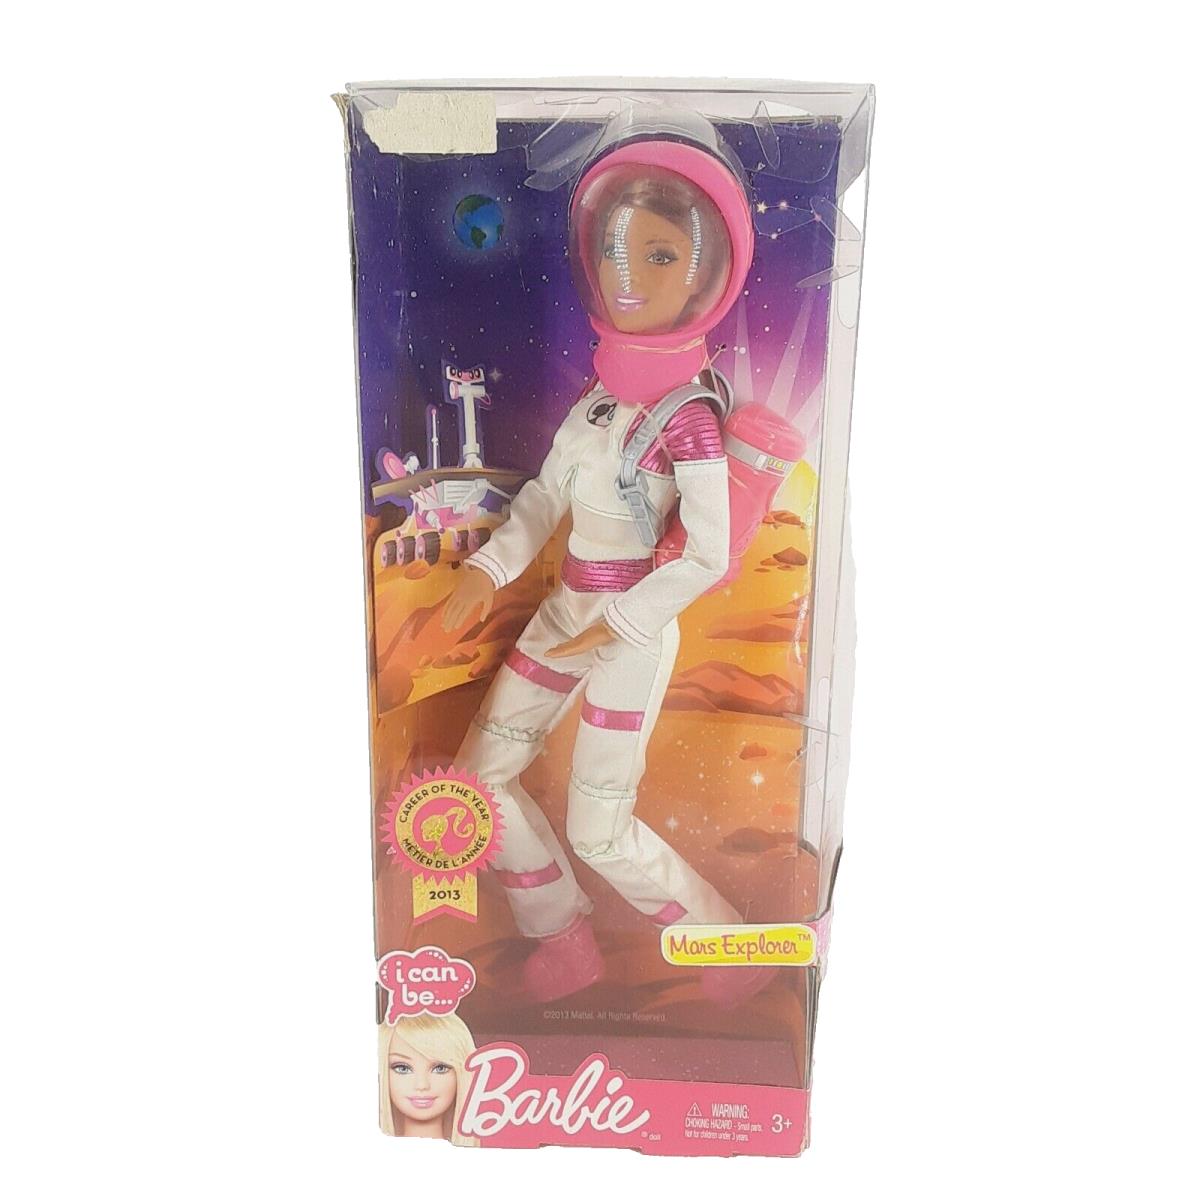 Barbie I Can Be Mars Explorer 2013 Career of The Year Doll Imagination Astronaut